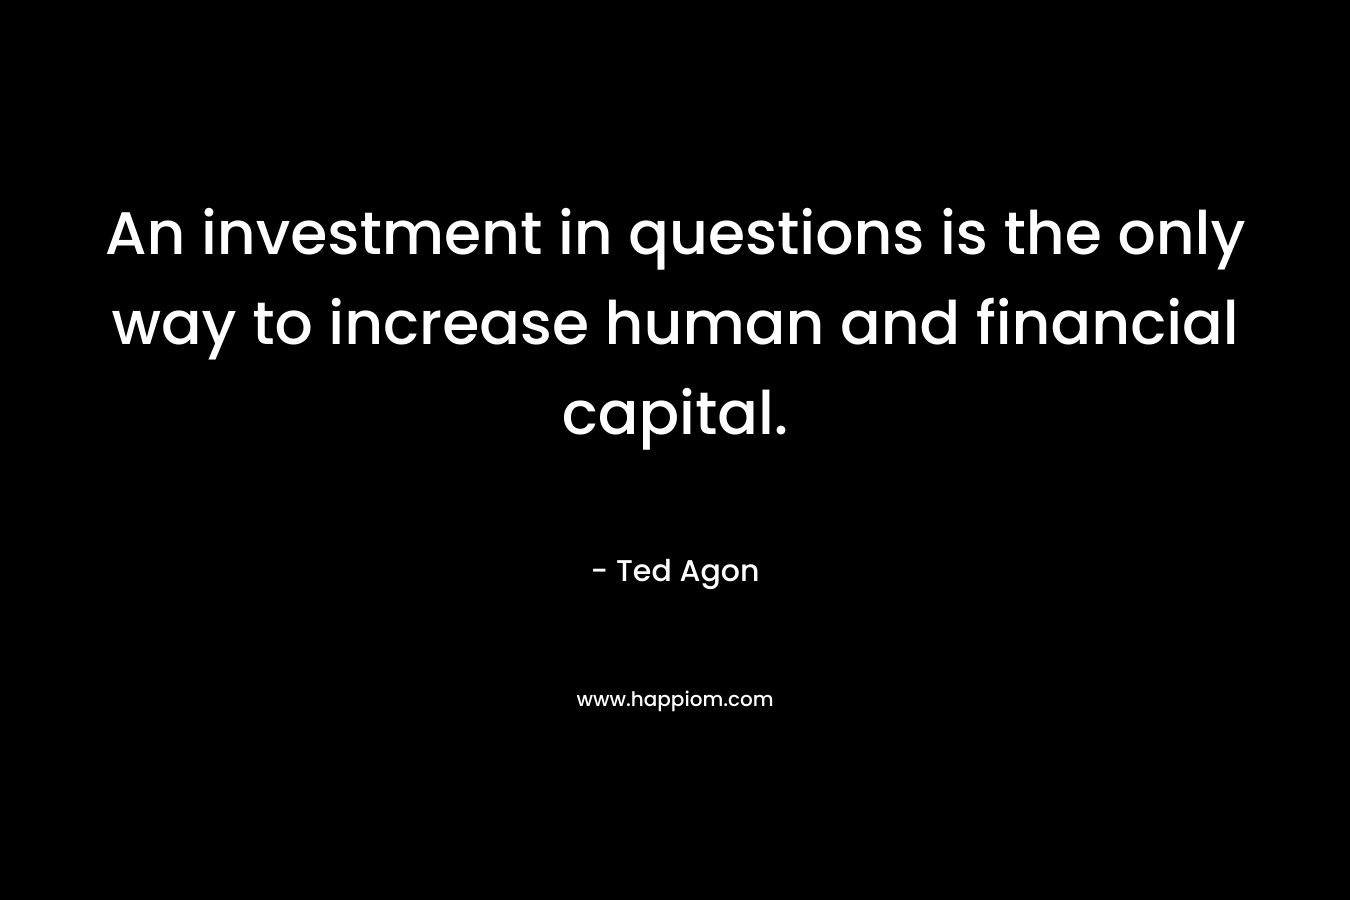 An investment in questions is the only way to increase human and financial capital.